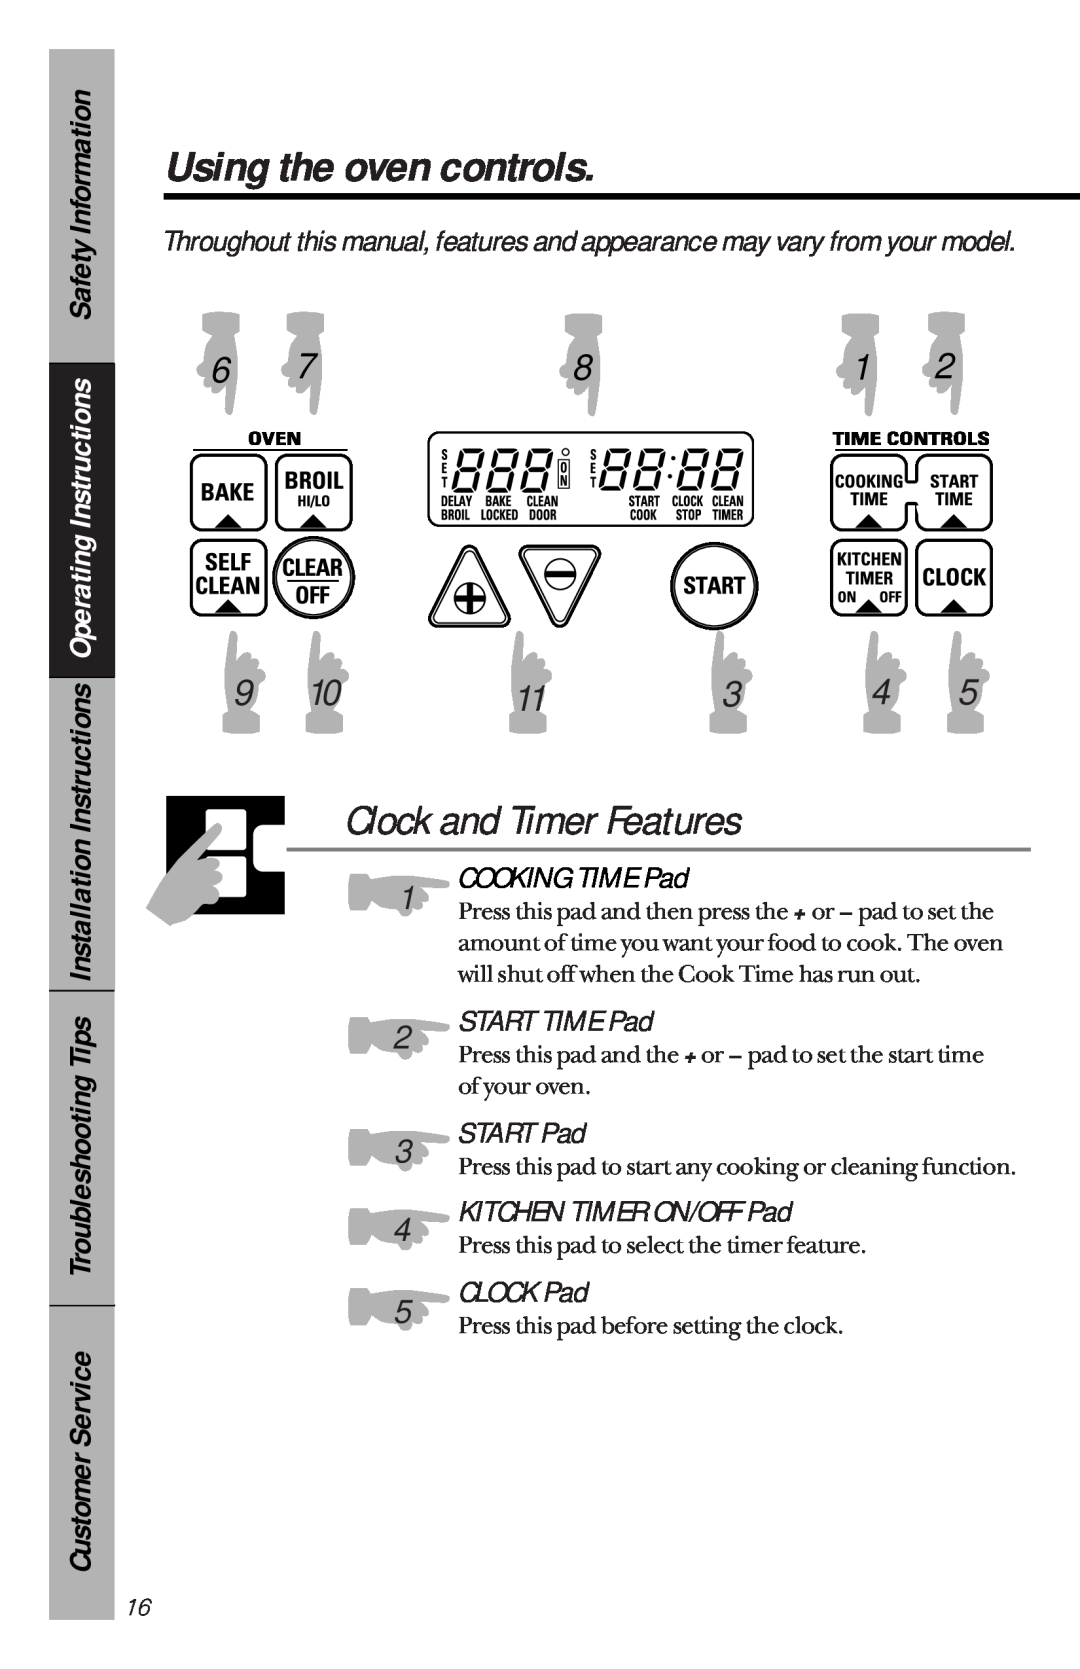 GE 49-8827 Using the oven controls, START TIME Pad, START Pad, CLOCK Pad, Clock and Timer Features, COOKING TIME Pad 